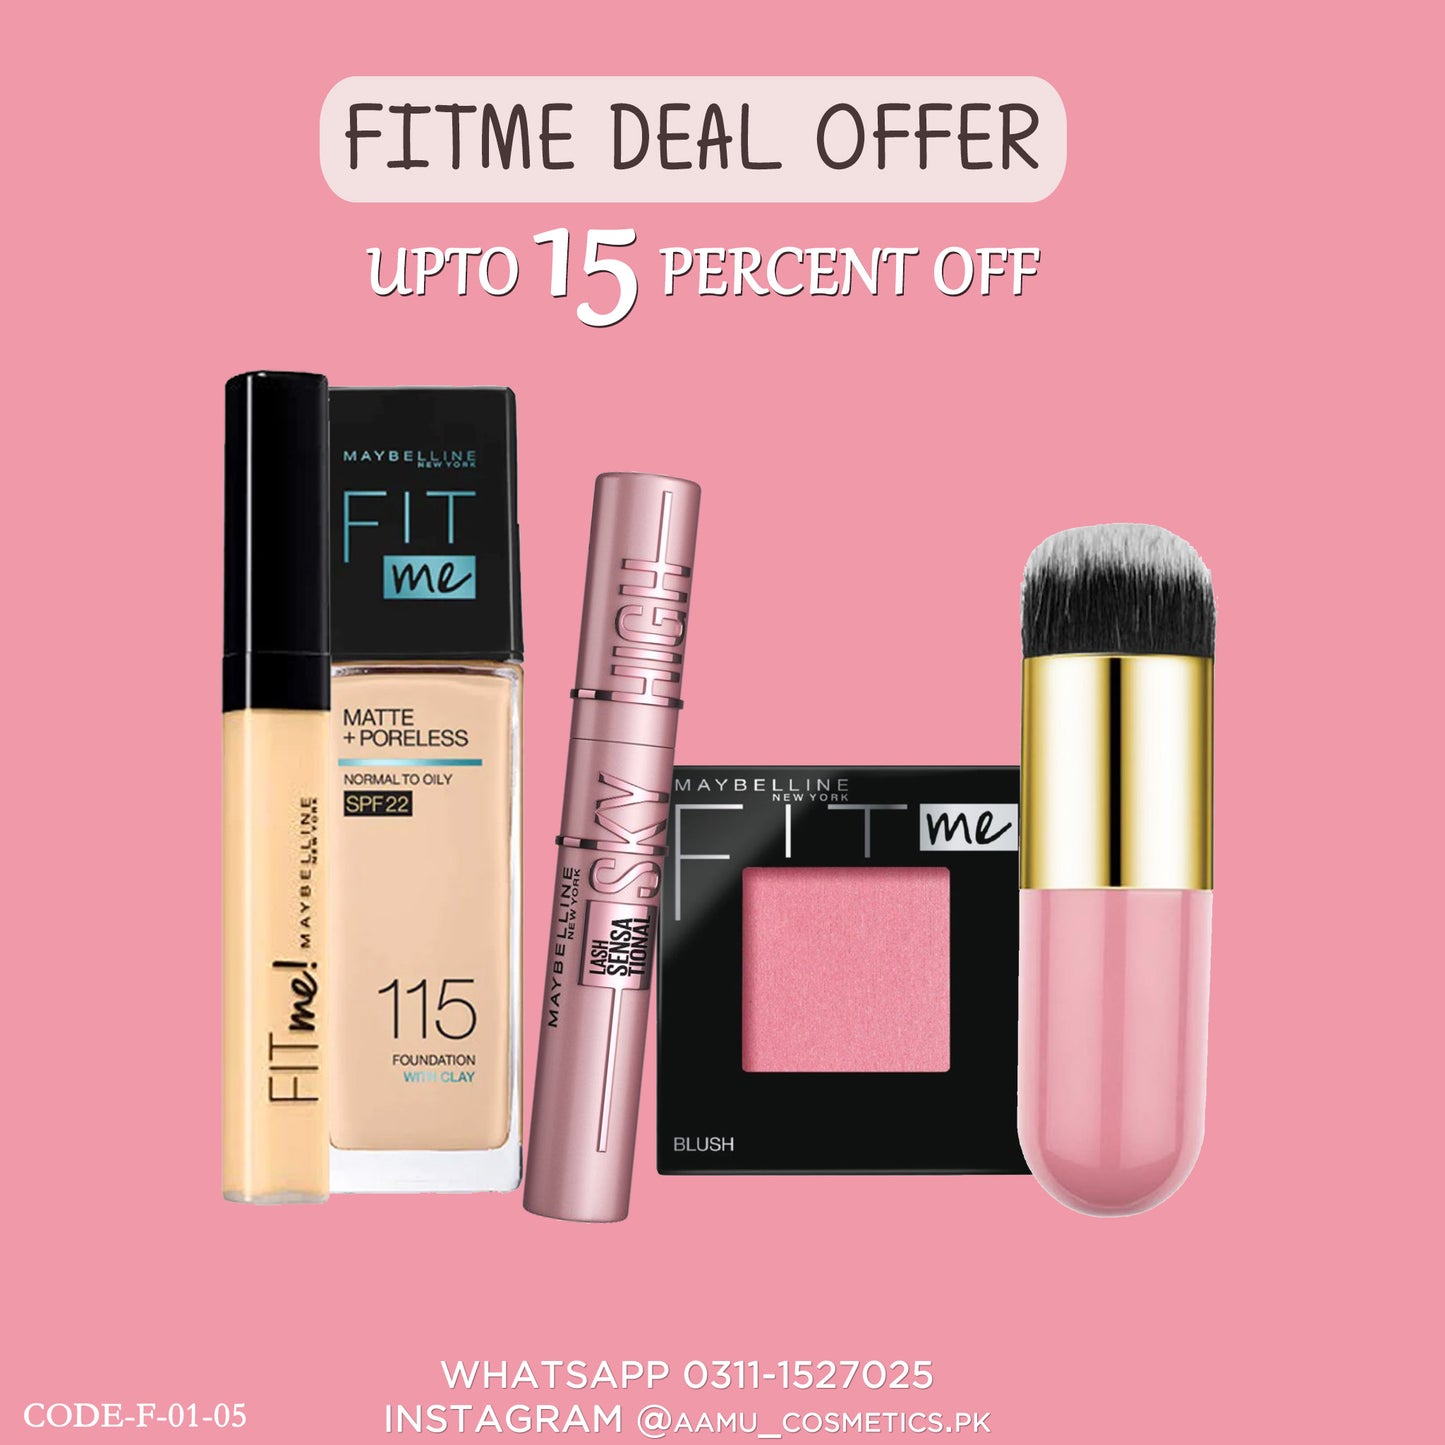 Fit Me Deal Offer – AAMU COSMETICS